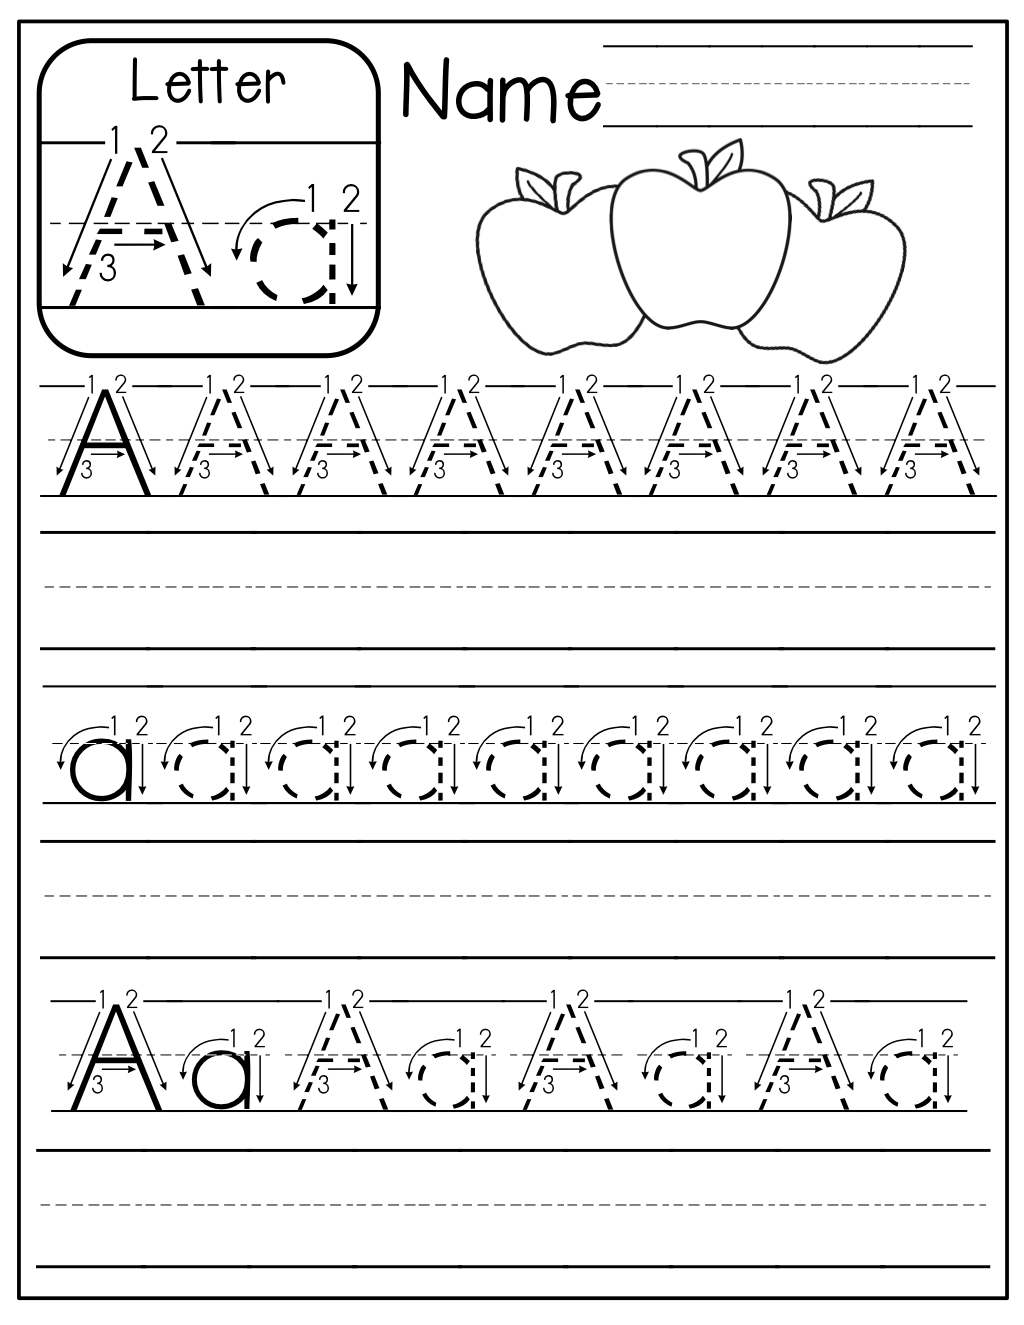 Free Tracing Letters A Z Worksheets 